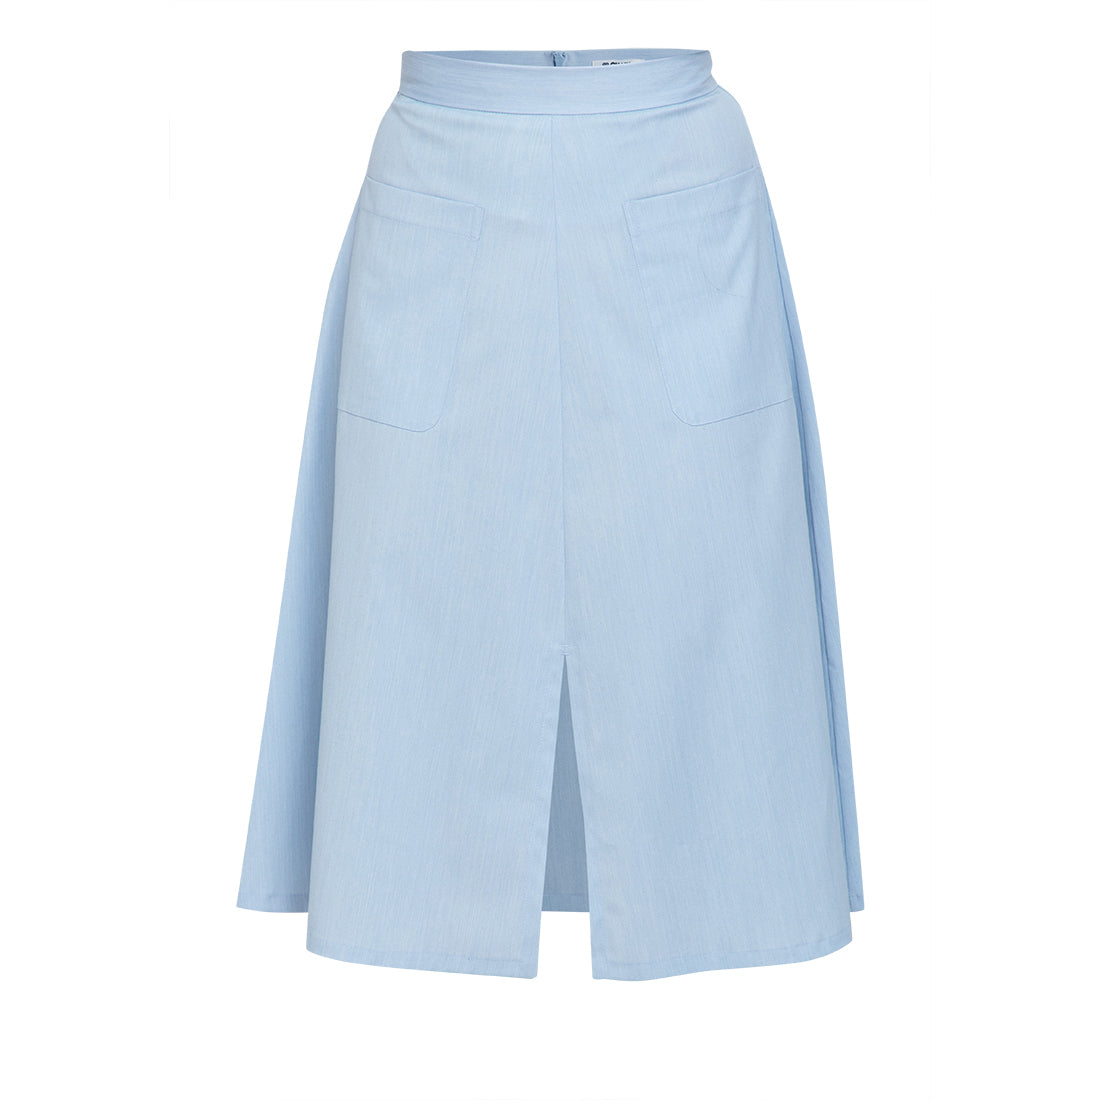 Connie A-line Skirt in Light Blue